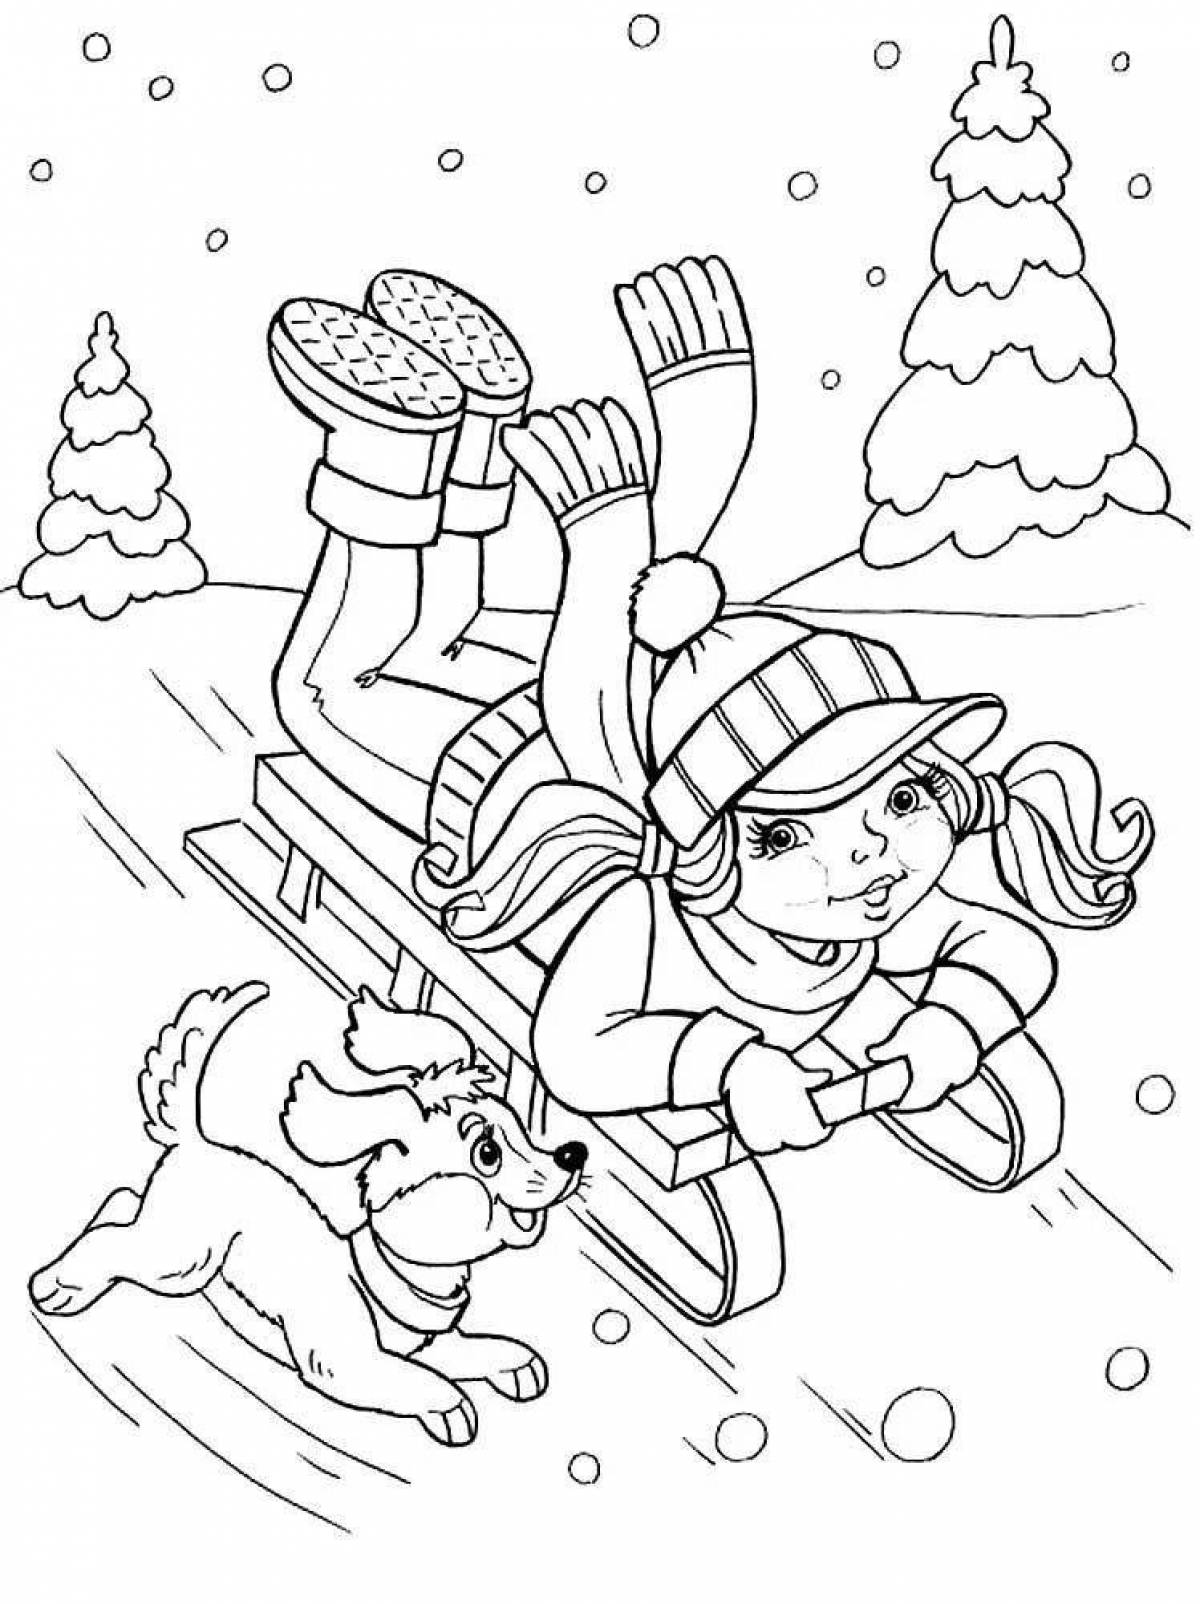 Sledging adventure coloring page